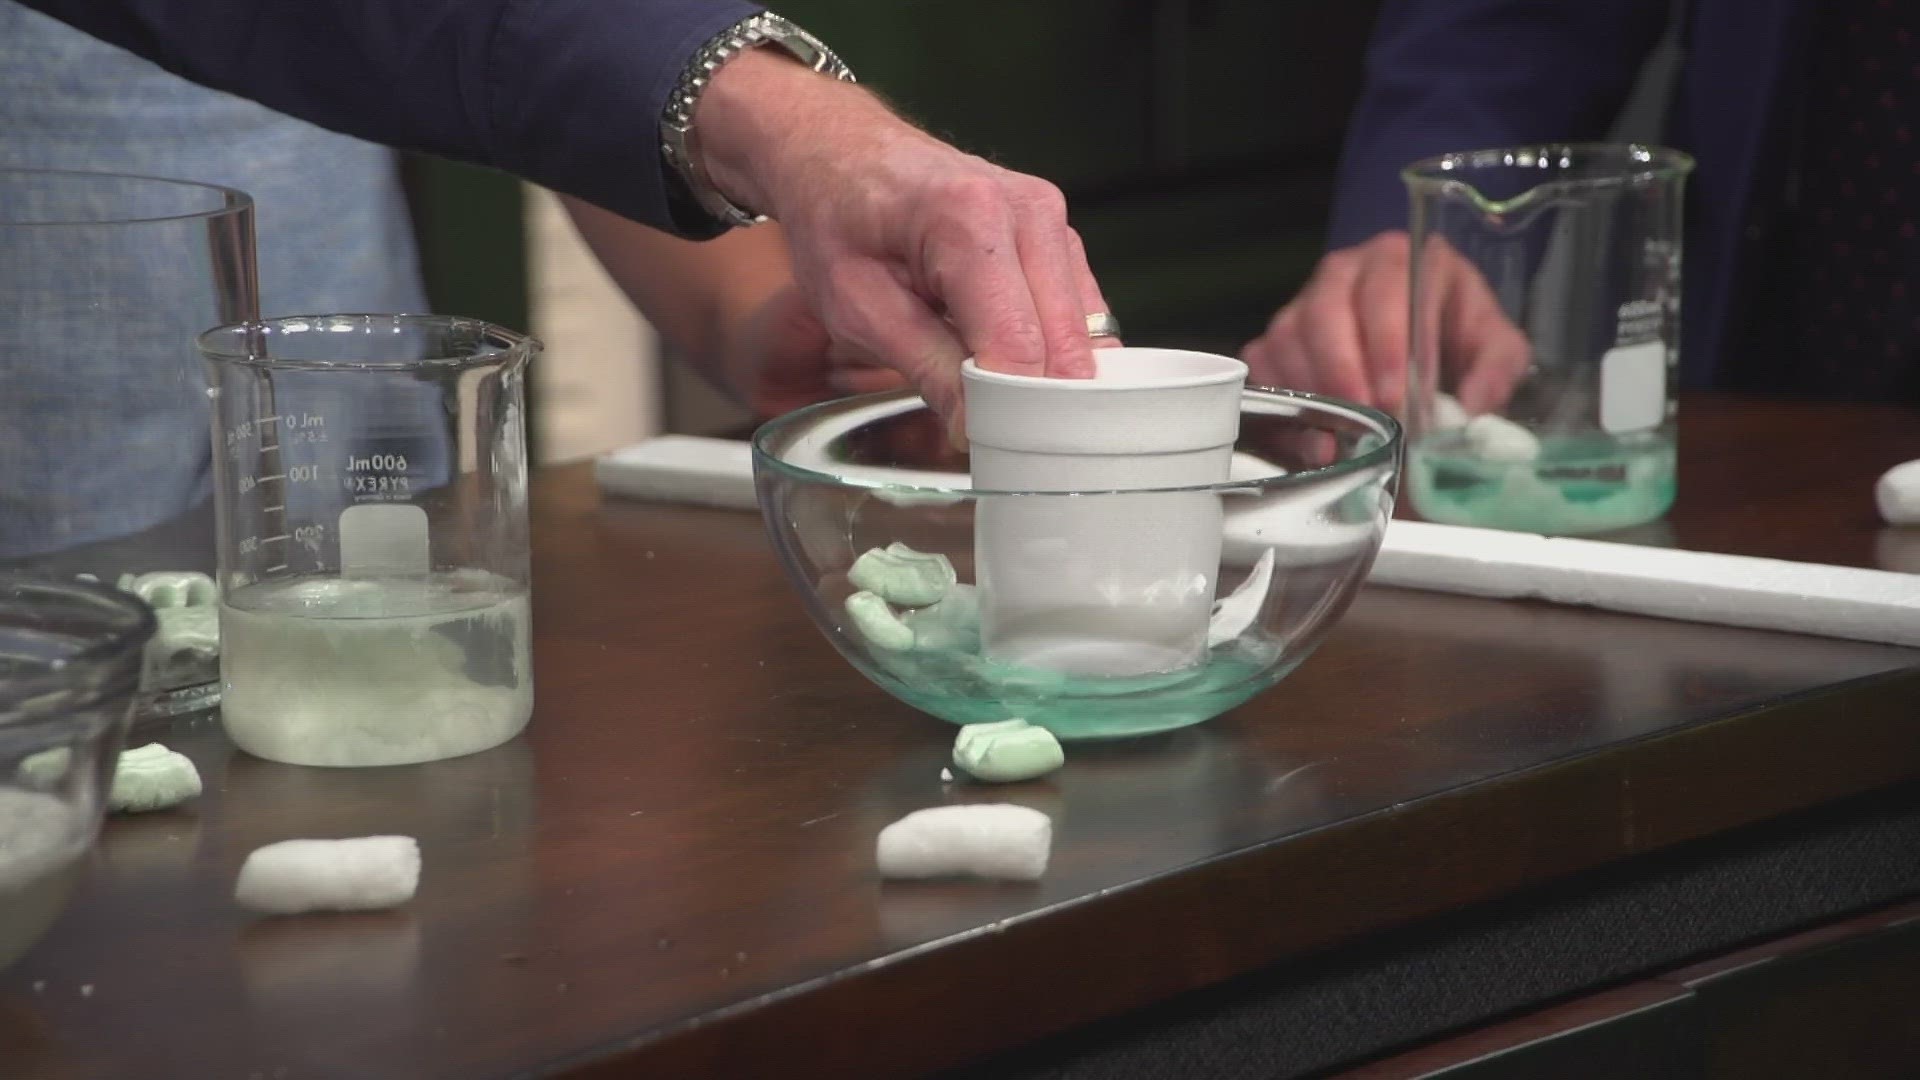 Science guy Steve Spangler demonstrates an Earth Day science experiment that can teach us a bit more about recycling.